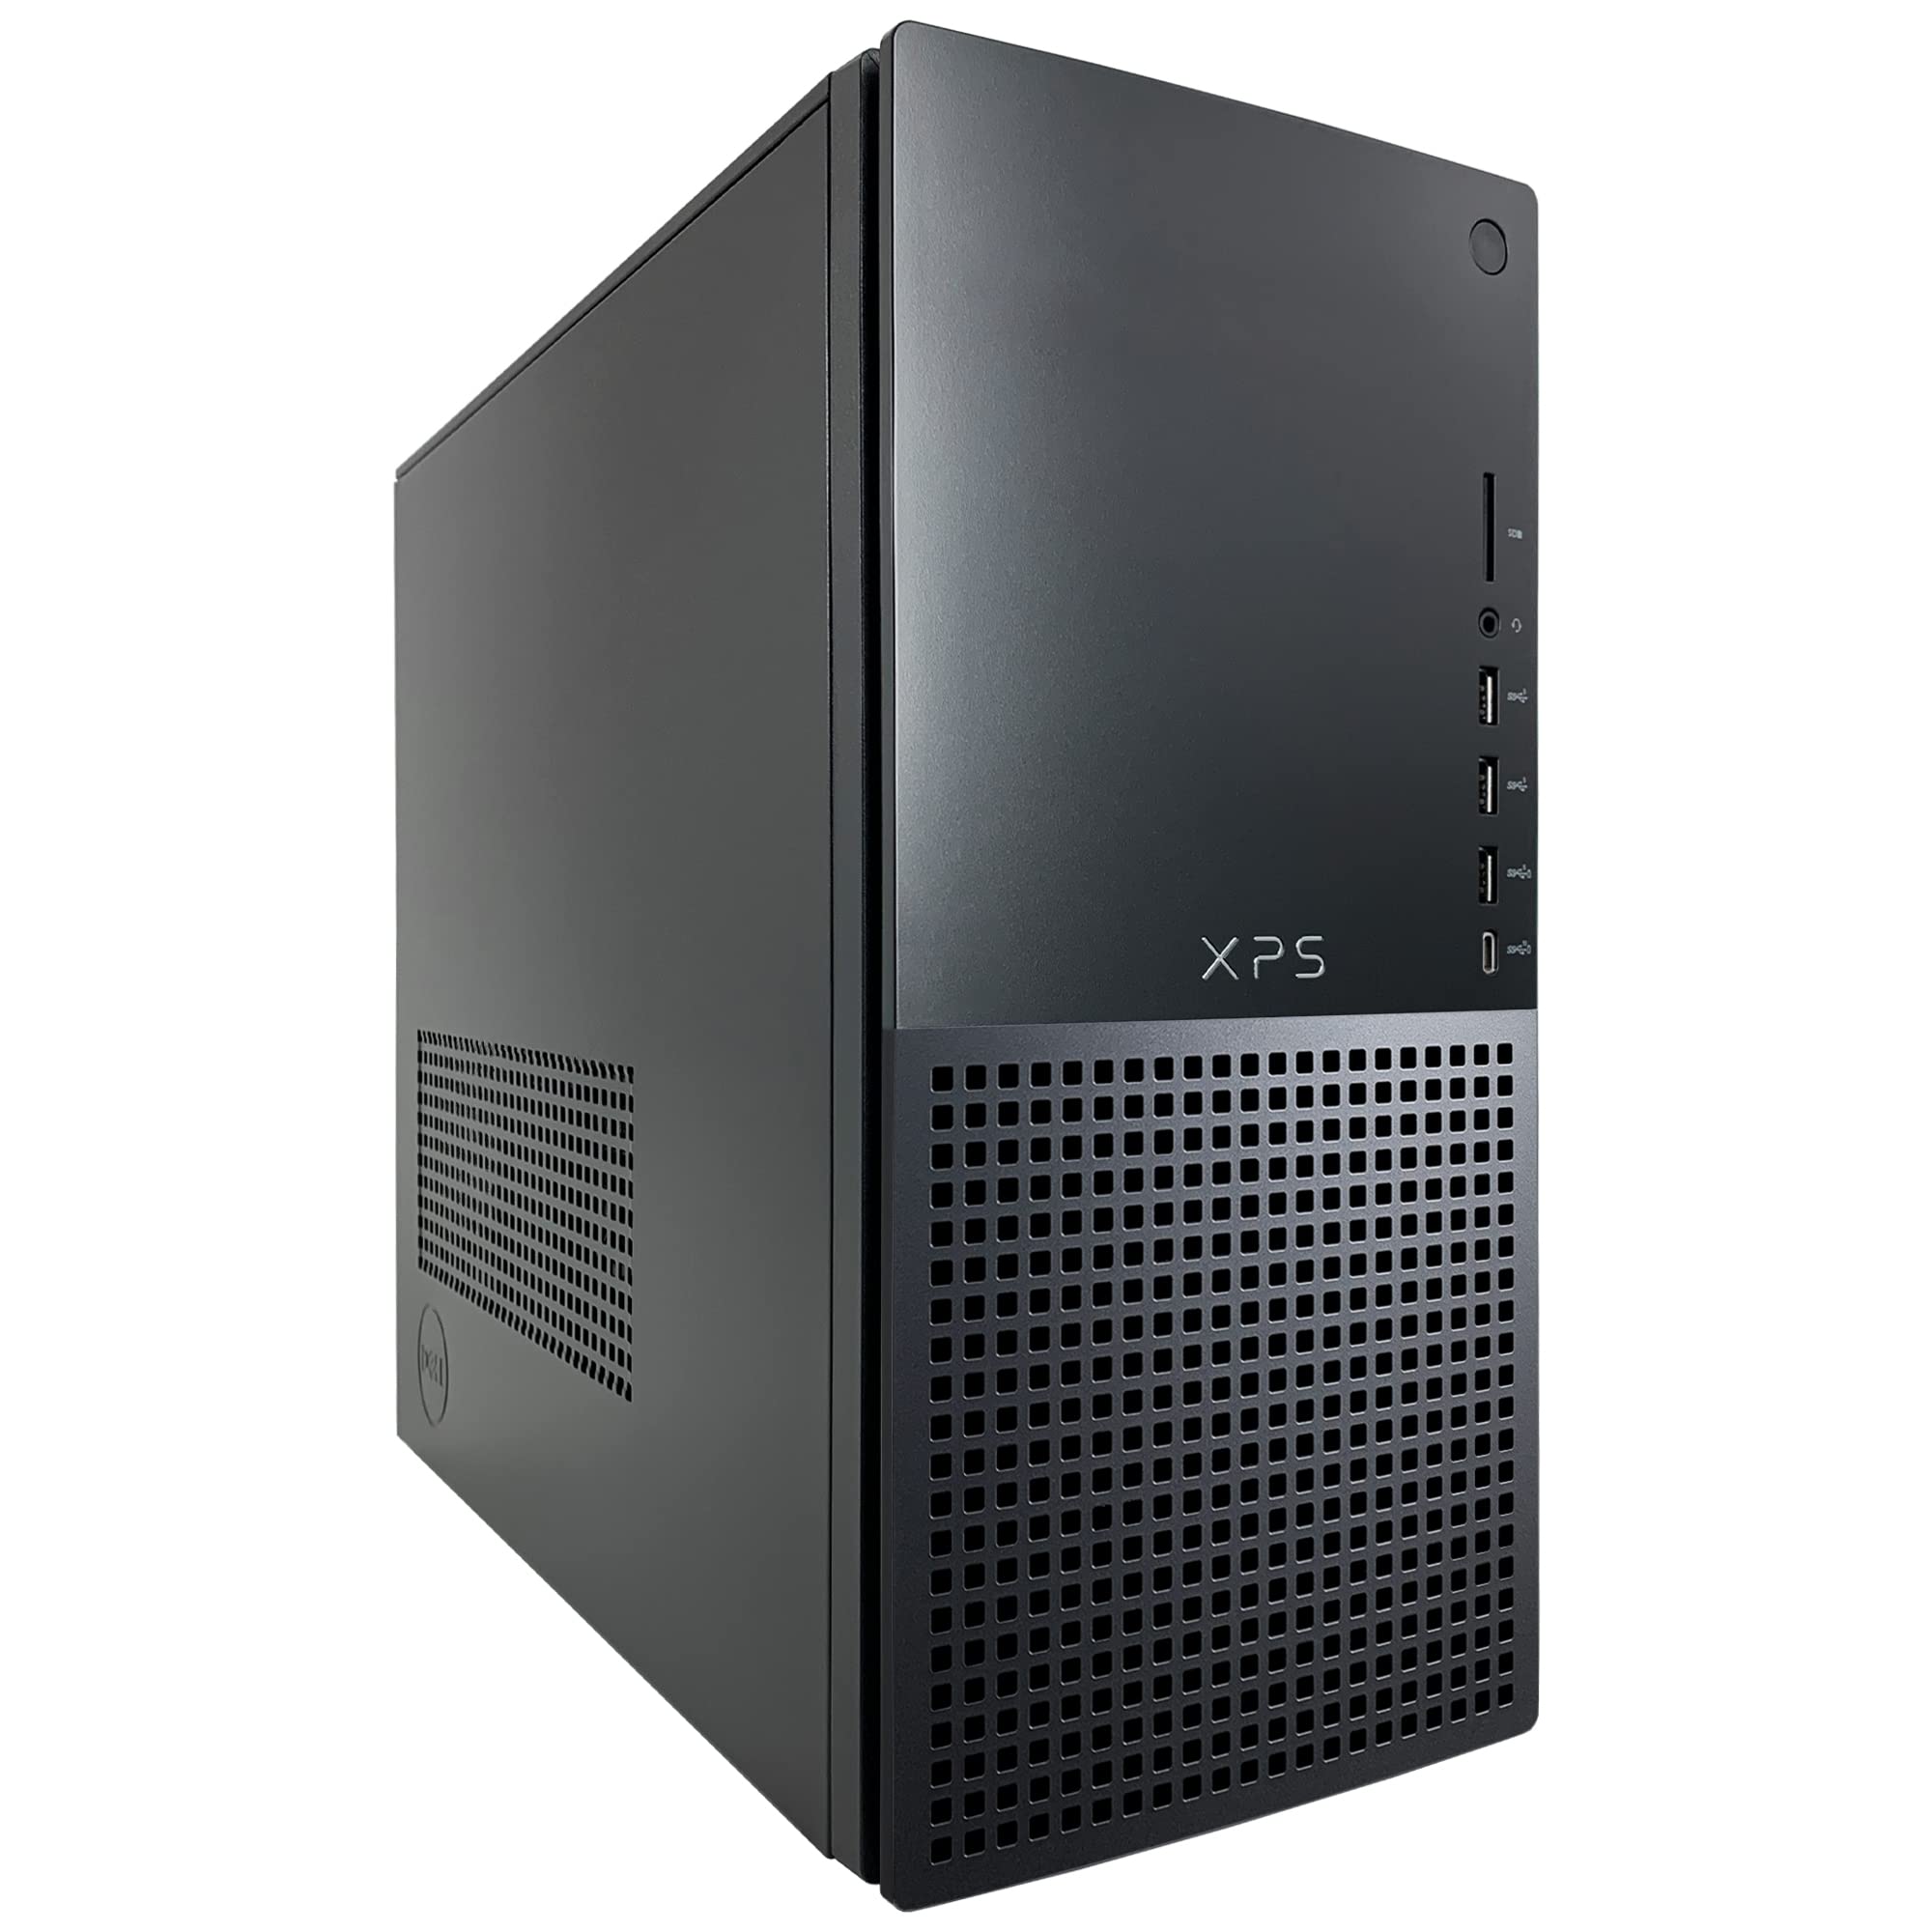 Dell XPS 8960 Gaming Desktop Computer - 13th Gen Intel Core i9-13900K 24-Core up to 5.80 GHz with Liquid Cooling, 64GB DDR5 RAM, 2TB NVMe SSD, GeForce RTX 3090 24GB GDDR6, Windows 11 Pro